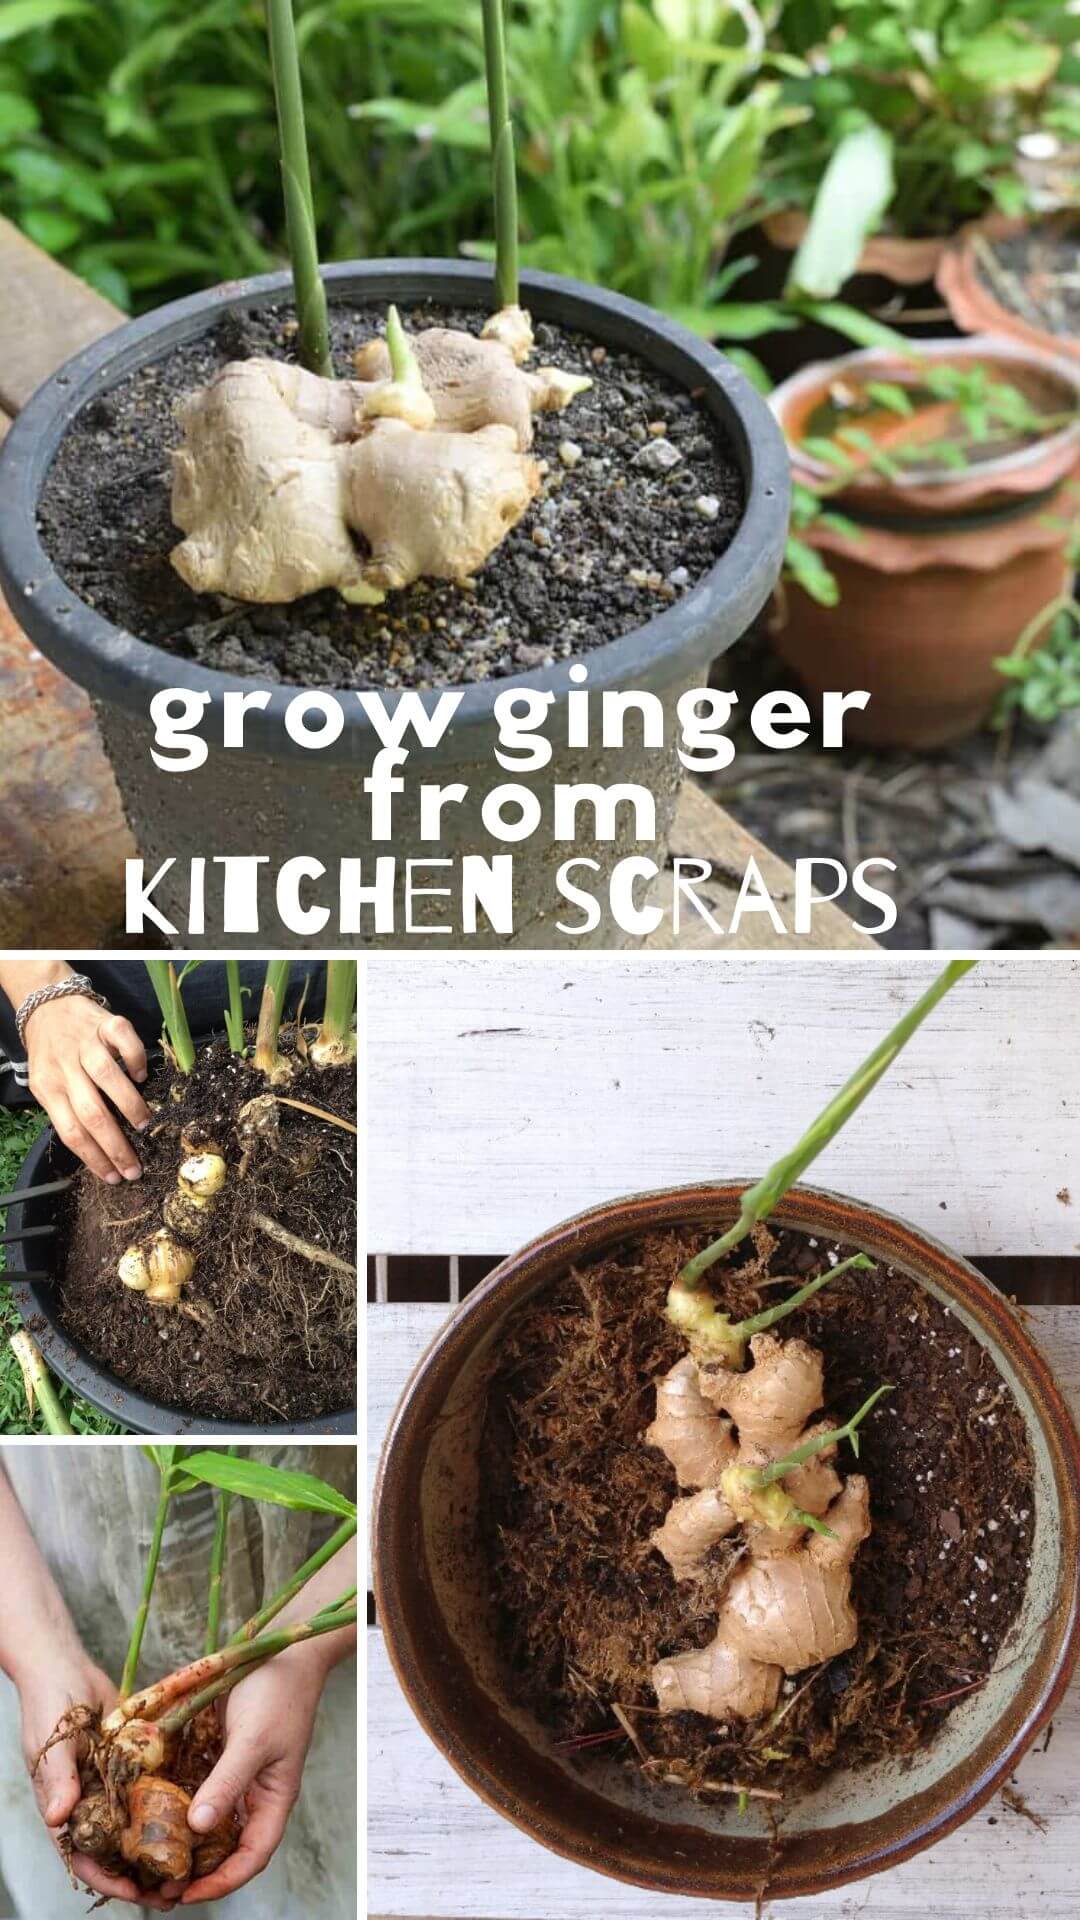 How to grow ginger from kitchen scraps